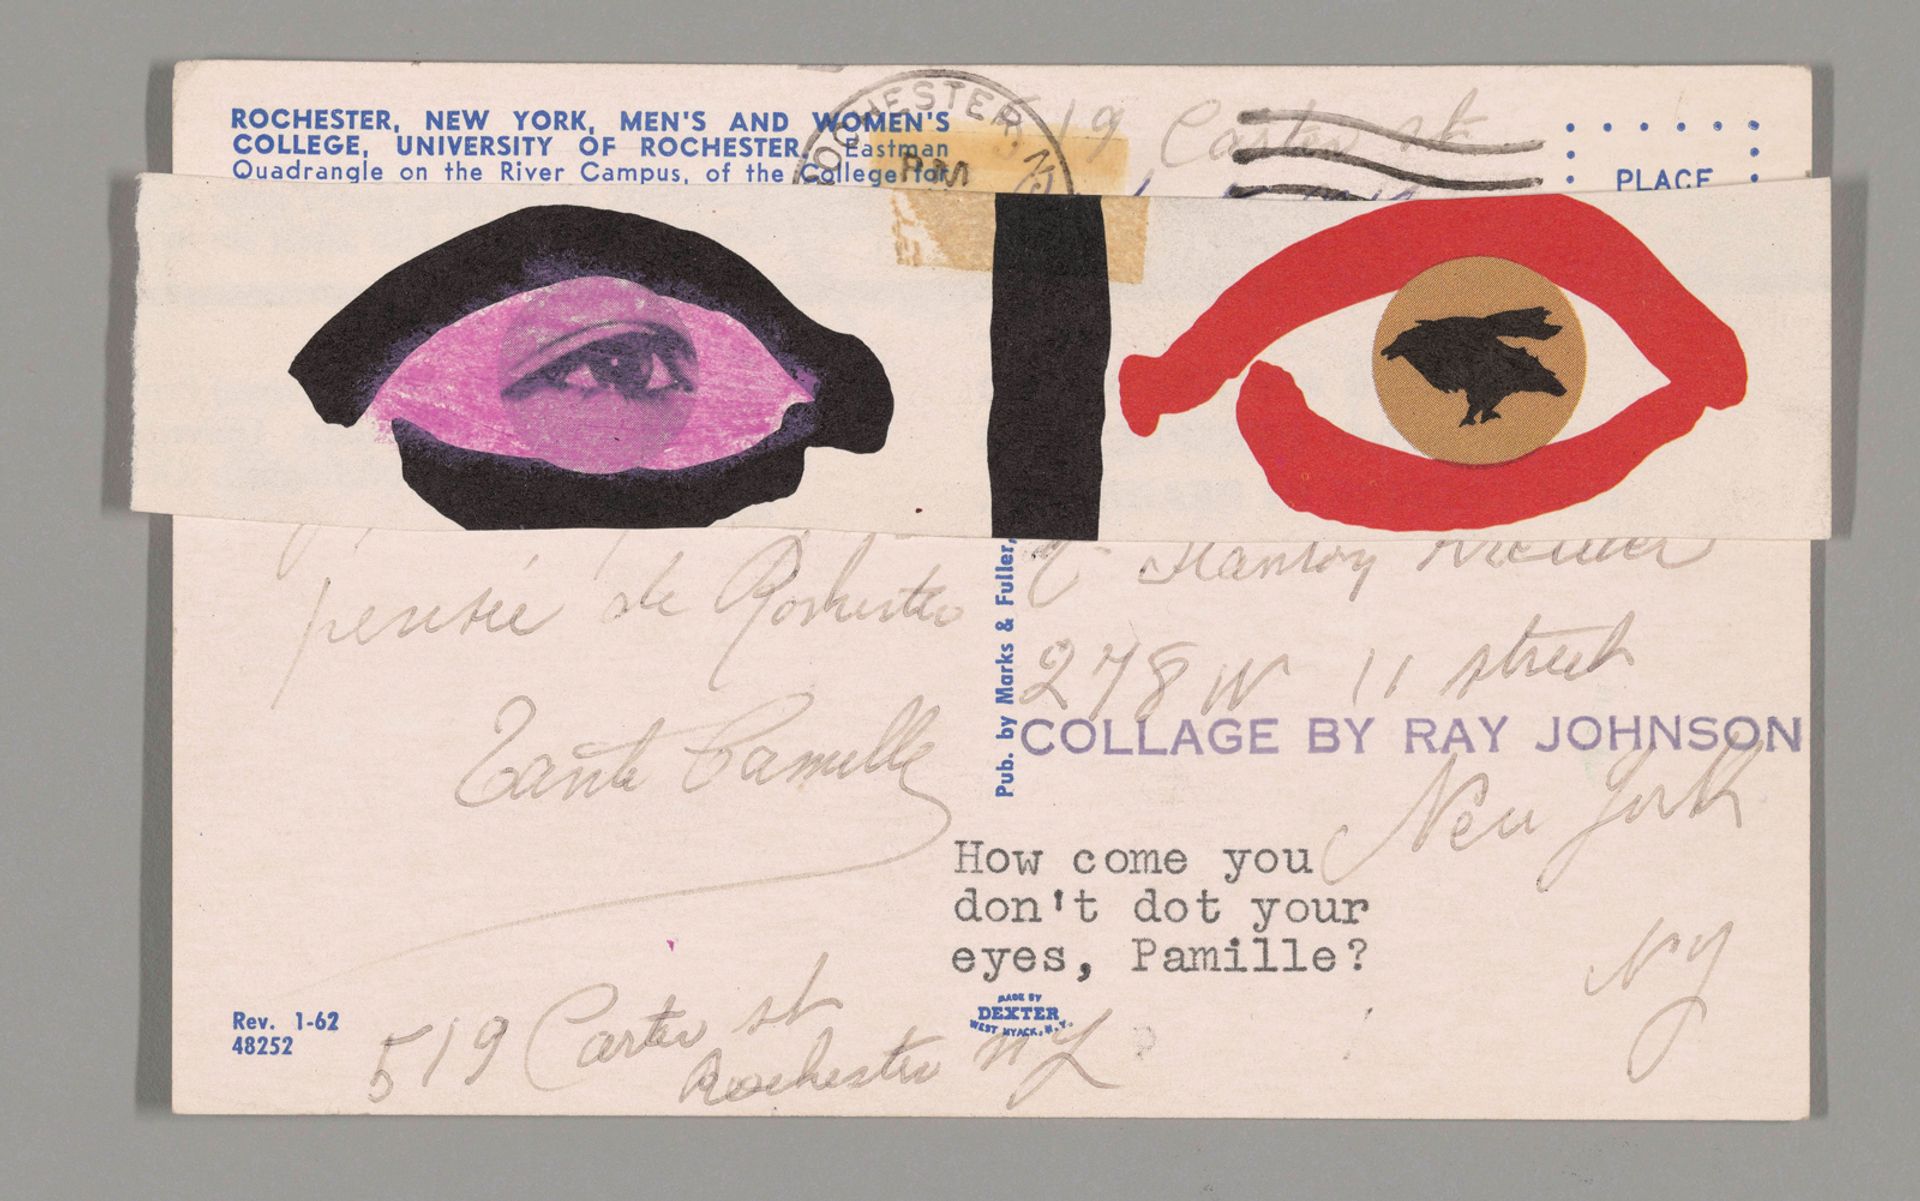 A piece of mail art by Ray Johnson, Untitled (65 02 15:10) (1965) Art Institute of Chicago, Gift of the William S. Wilson Collection of Ray Johnson. © Ray Johnson Estate.